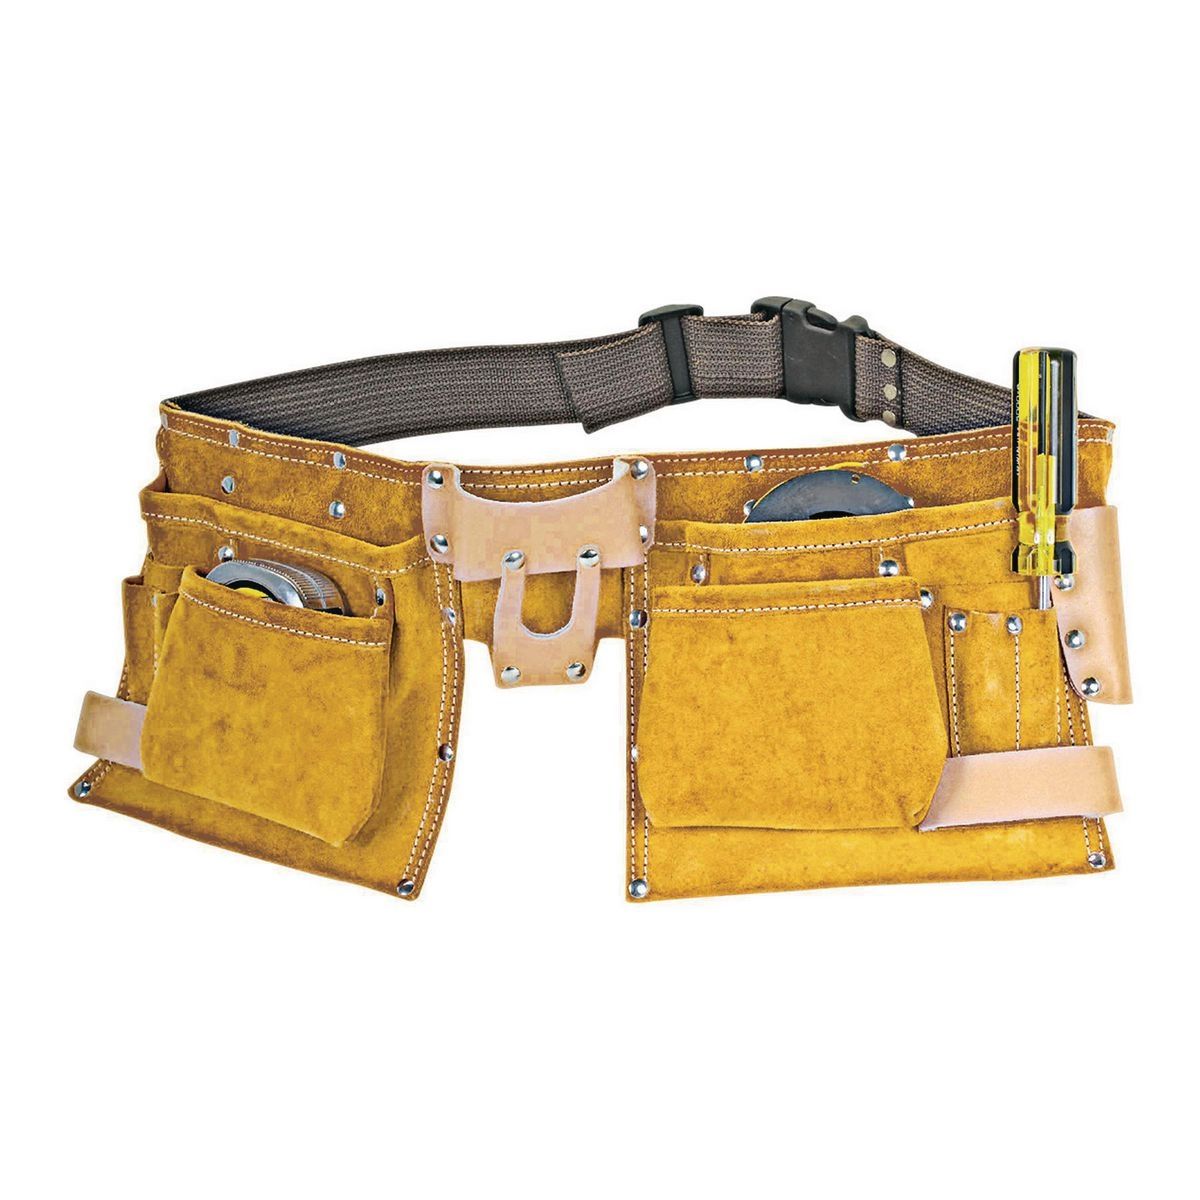 What Should You Carry In Your TOOL BELT?! (These Are The Best Tools For  Carpentry / Construction!!) 